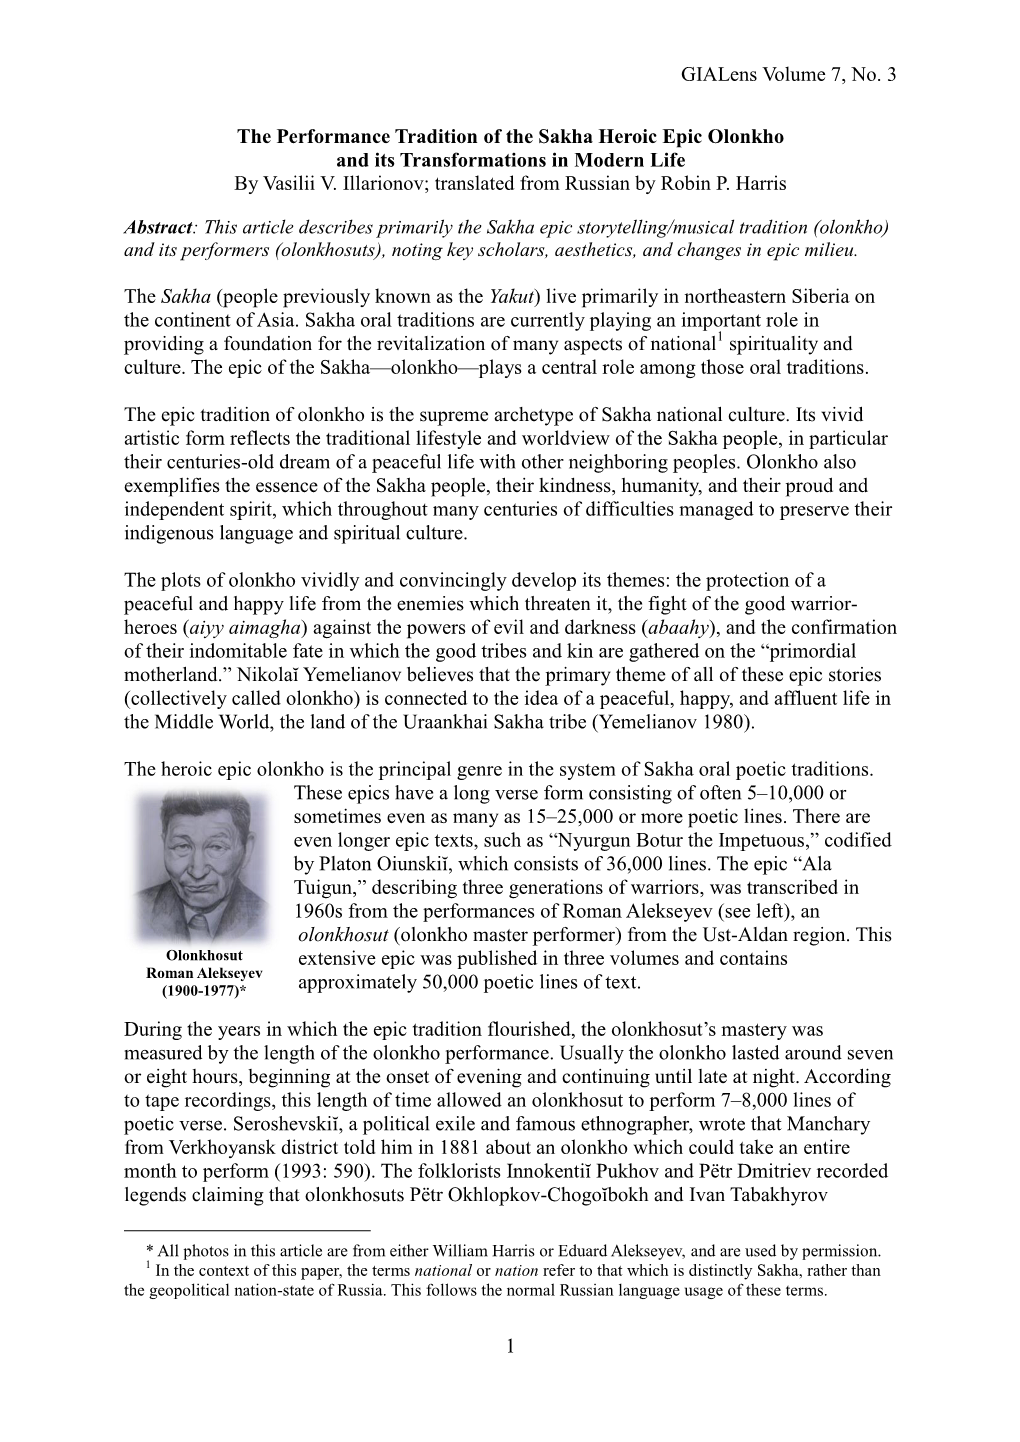 Gialens Volume 7, No. 3 1 the Performance Tradition of the Sakha